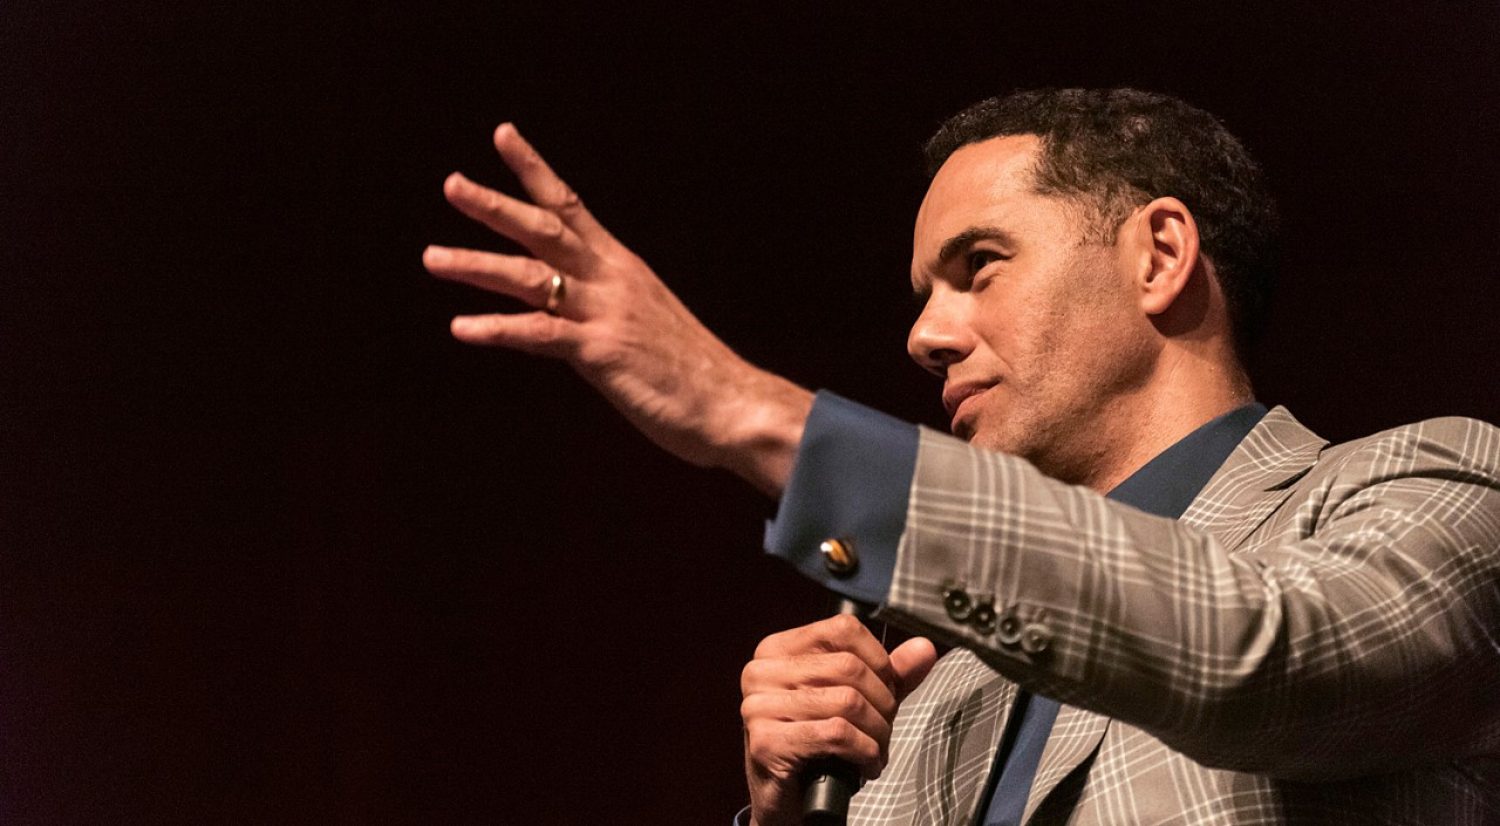 Diversity champion and author Steve Pemberton '89 chats with BC students